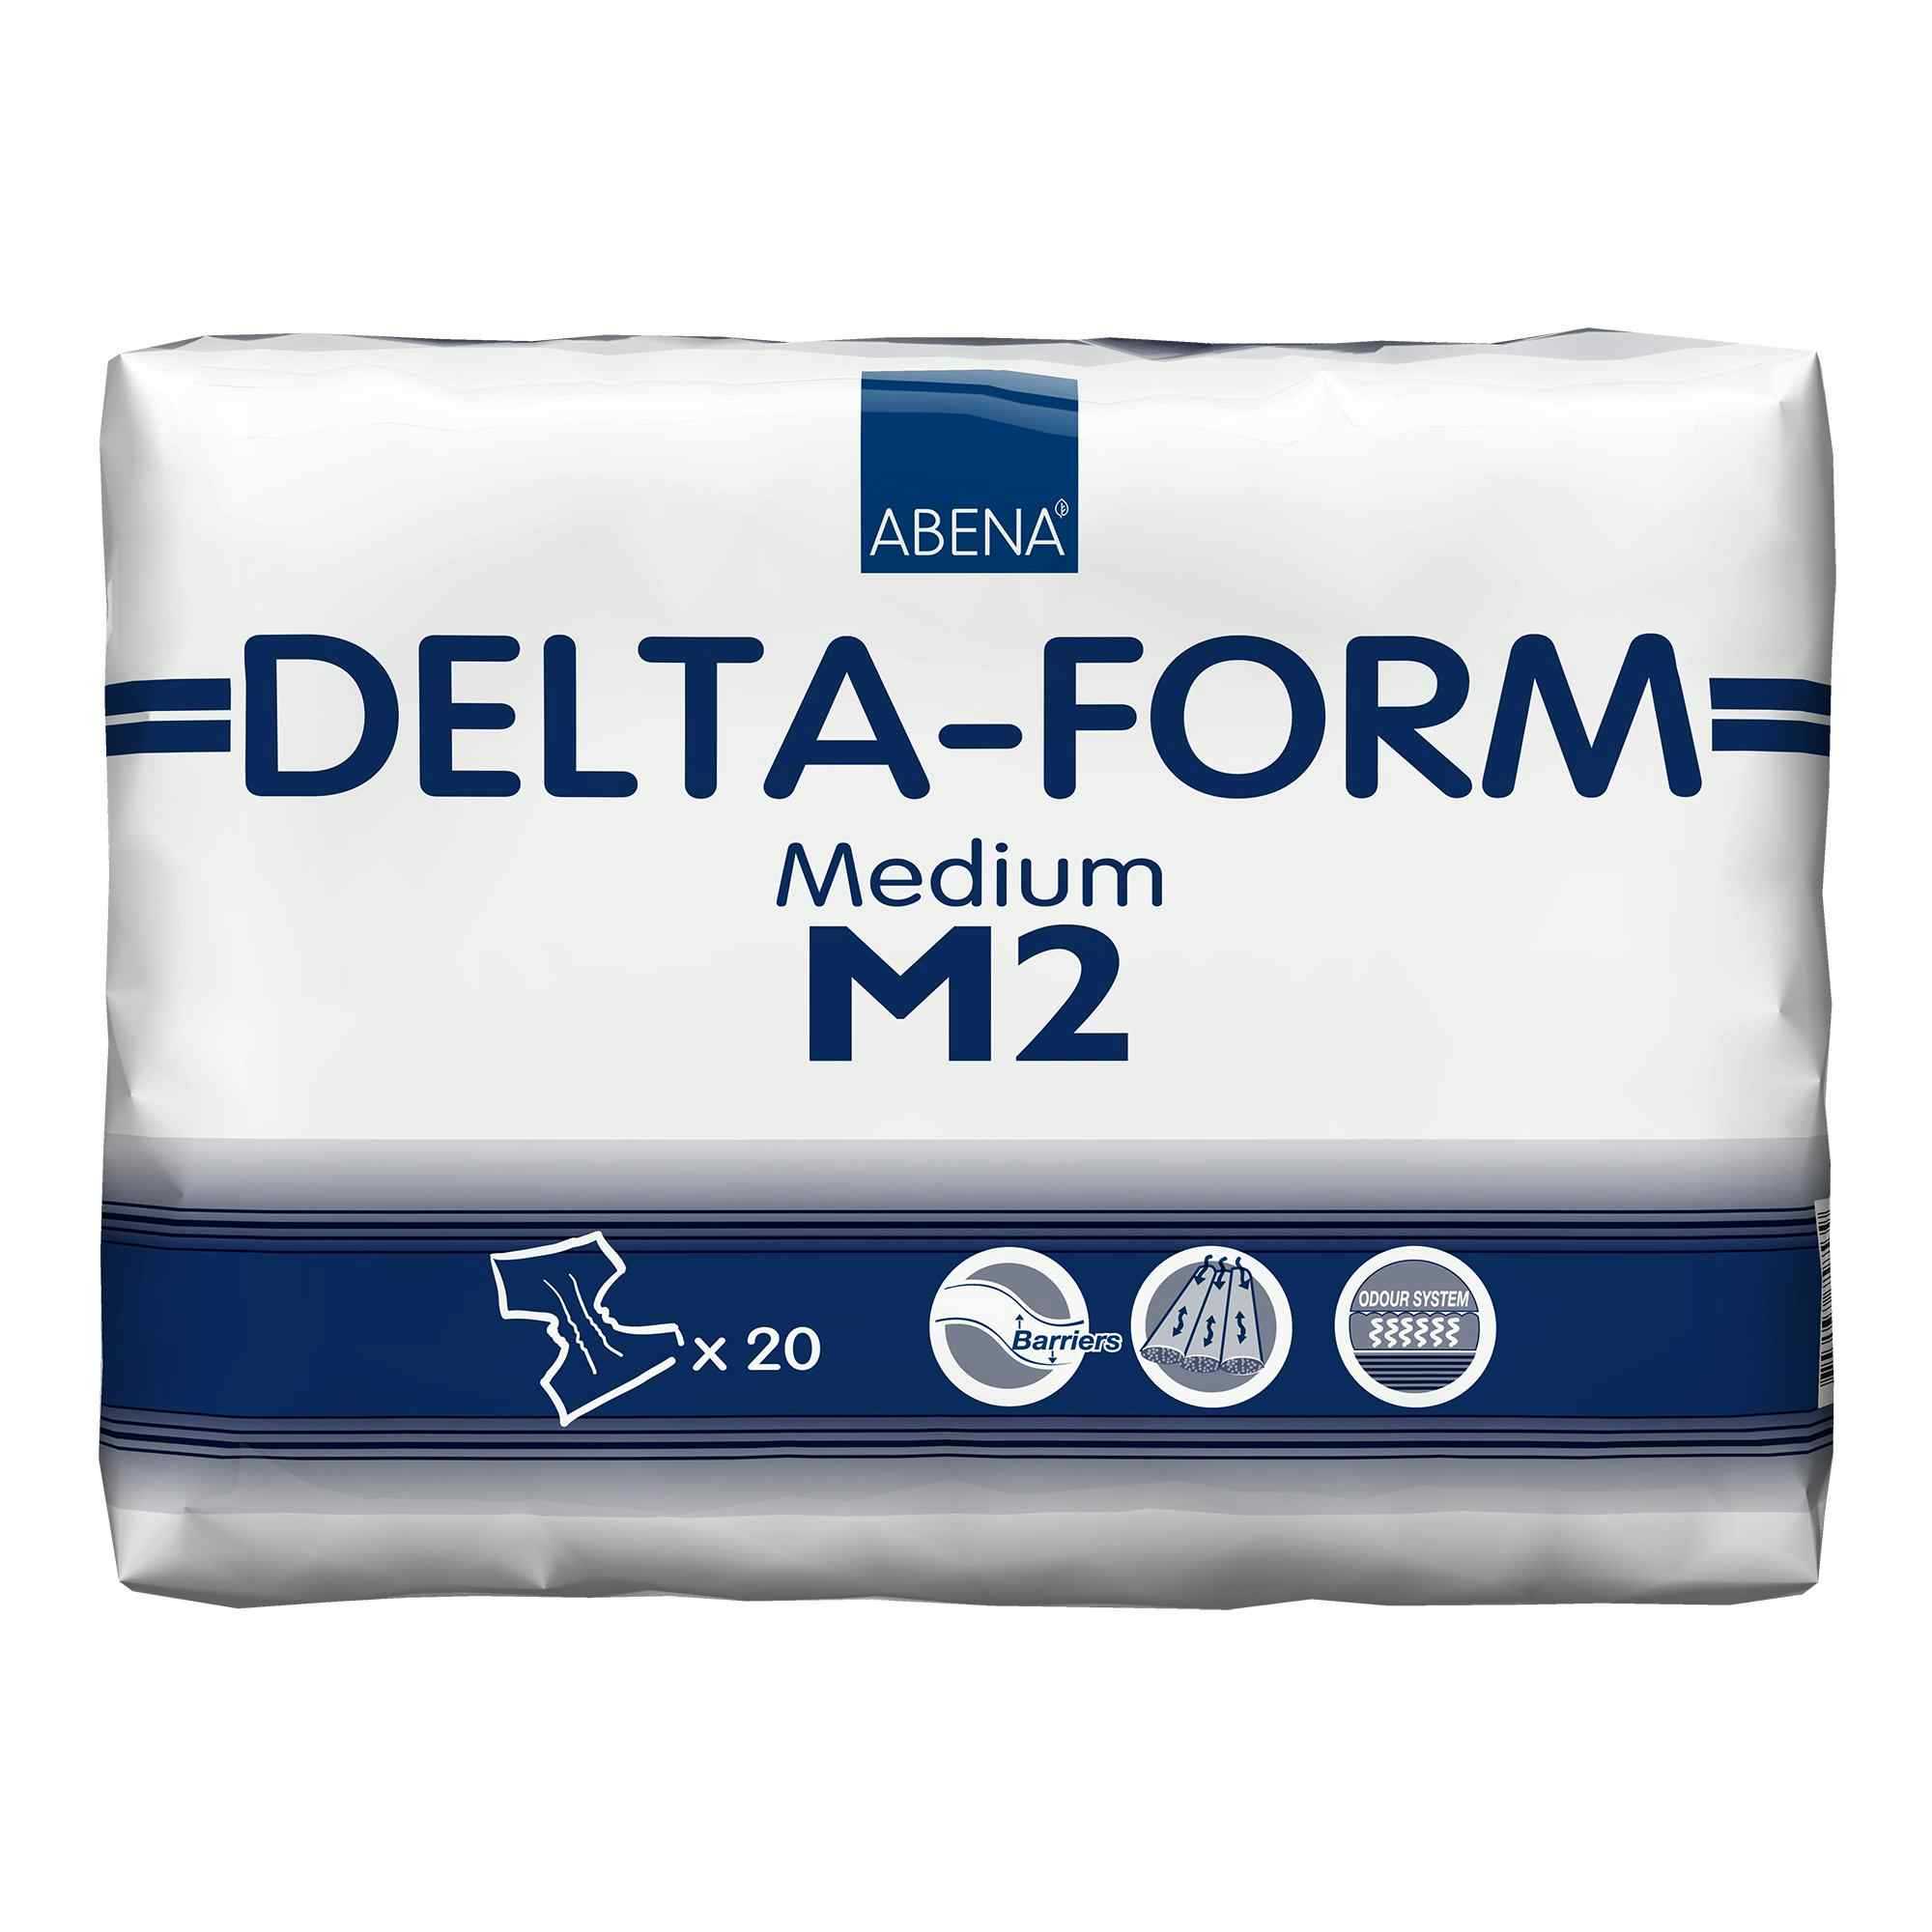 Abena Delta-Form Unisex Disposable Adult Diaper with Tabs, Moderate Absorbency, 308862, Blue - Medium (28-40") - Case of 80 Diapers (4 Bags)